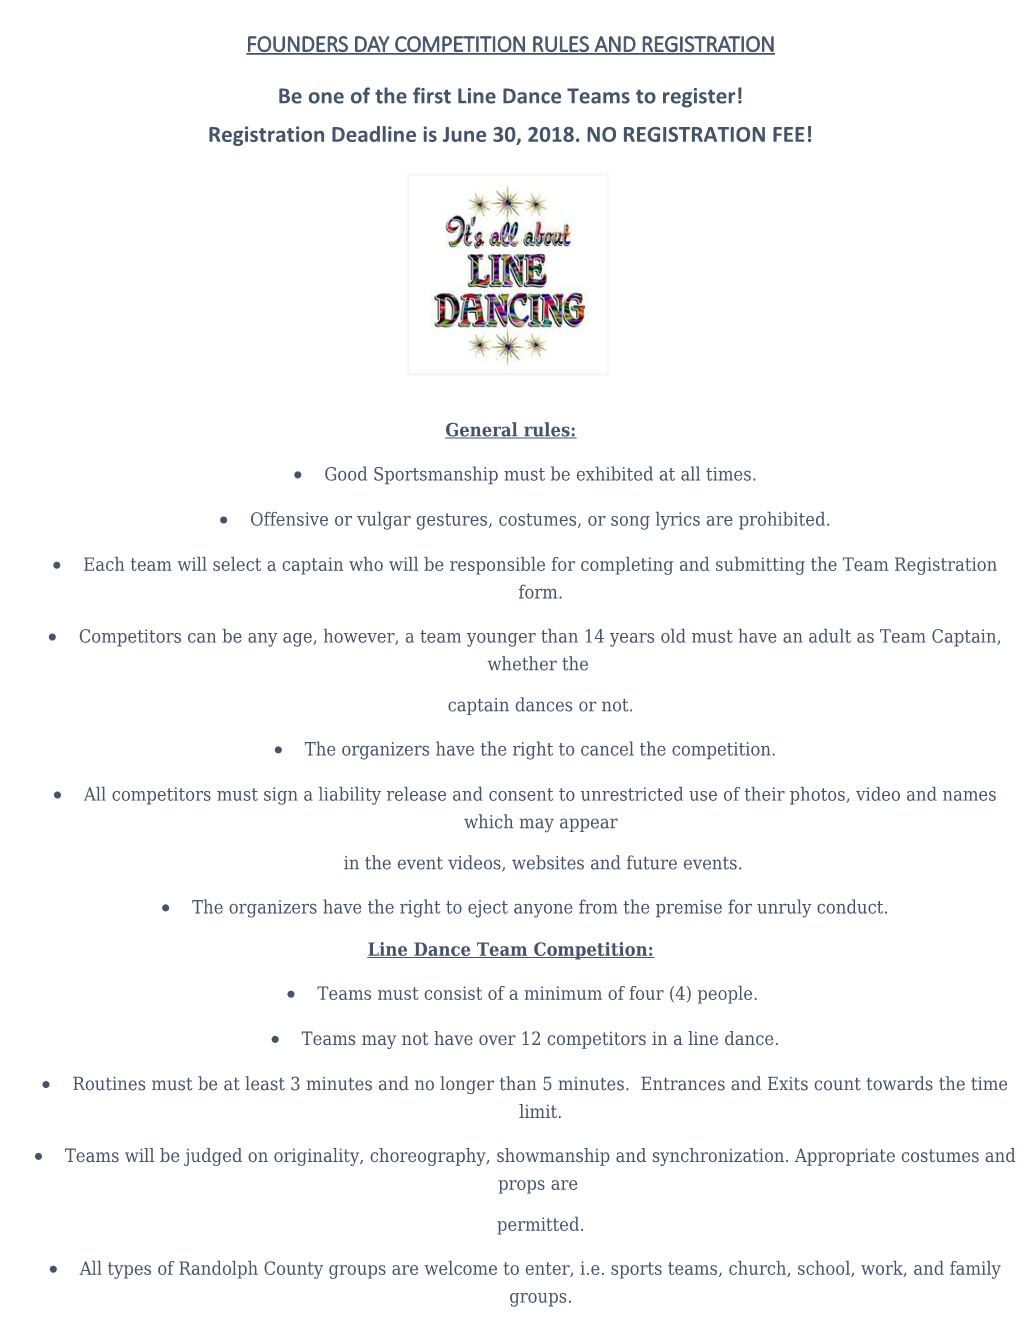 Founders Day Competition Rules and Registration